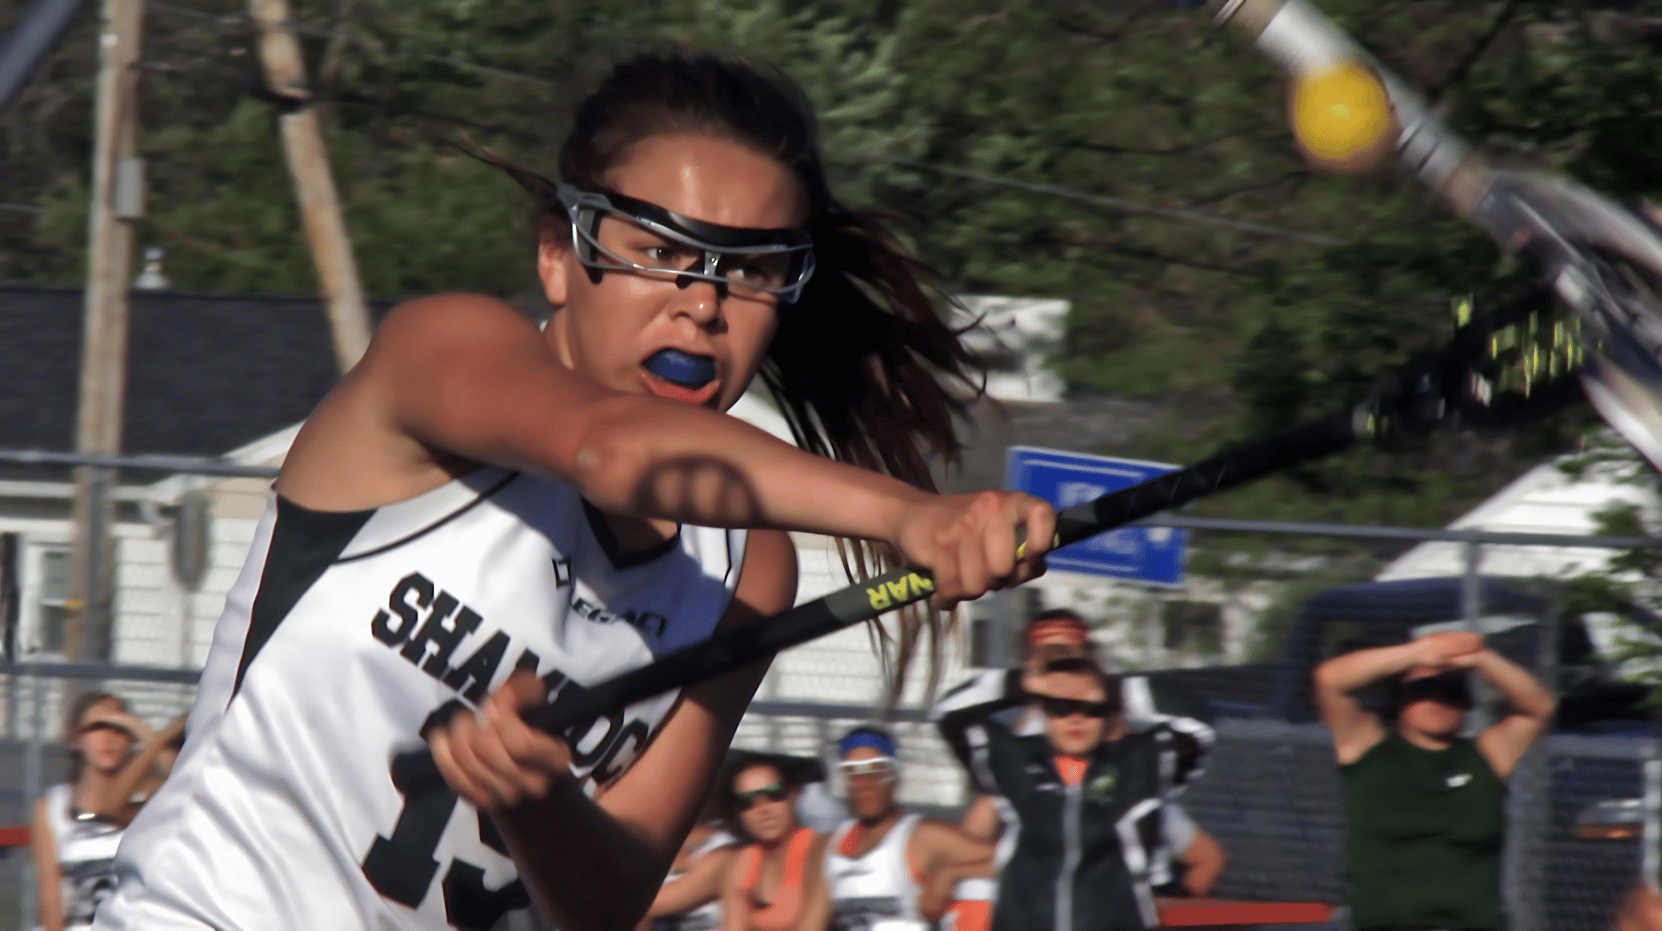 A lacrosse player in a white jersey and eye protection fiercely swings her stick during a game, with spectators watching in the background.